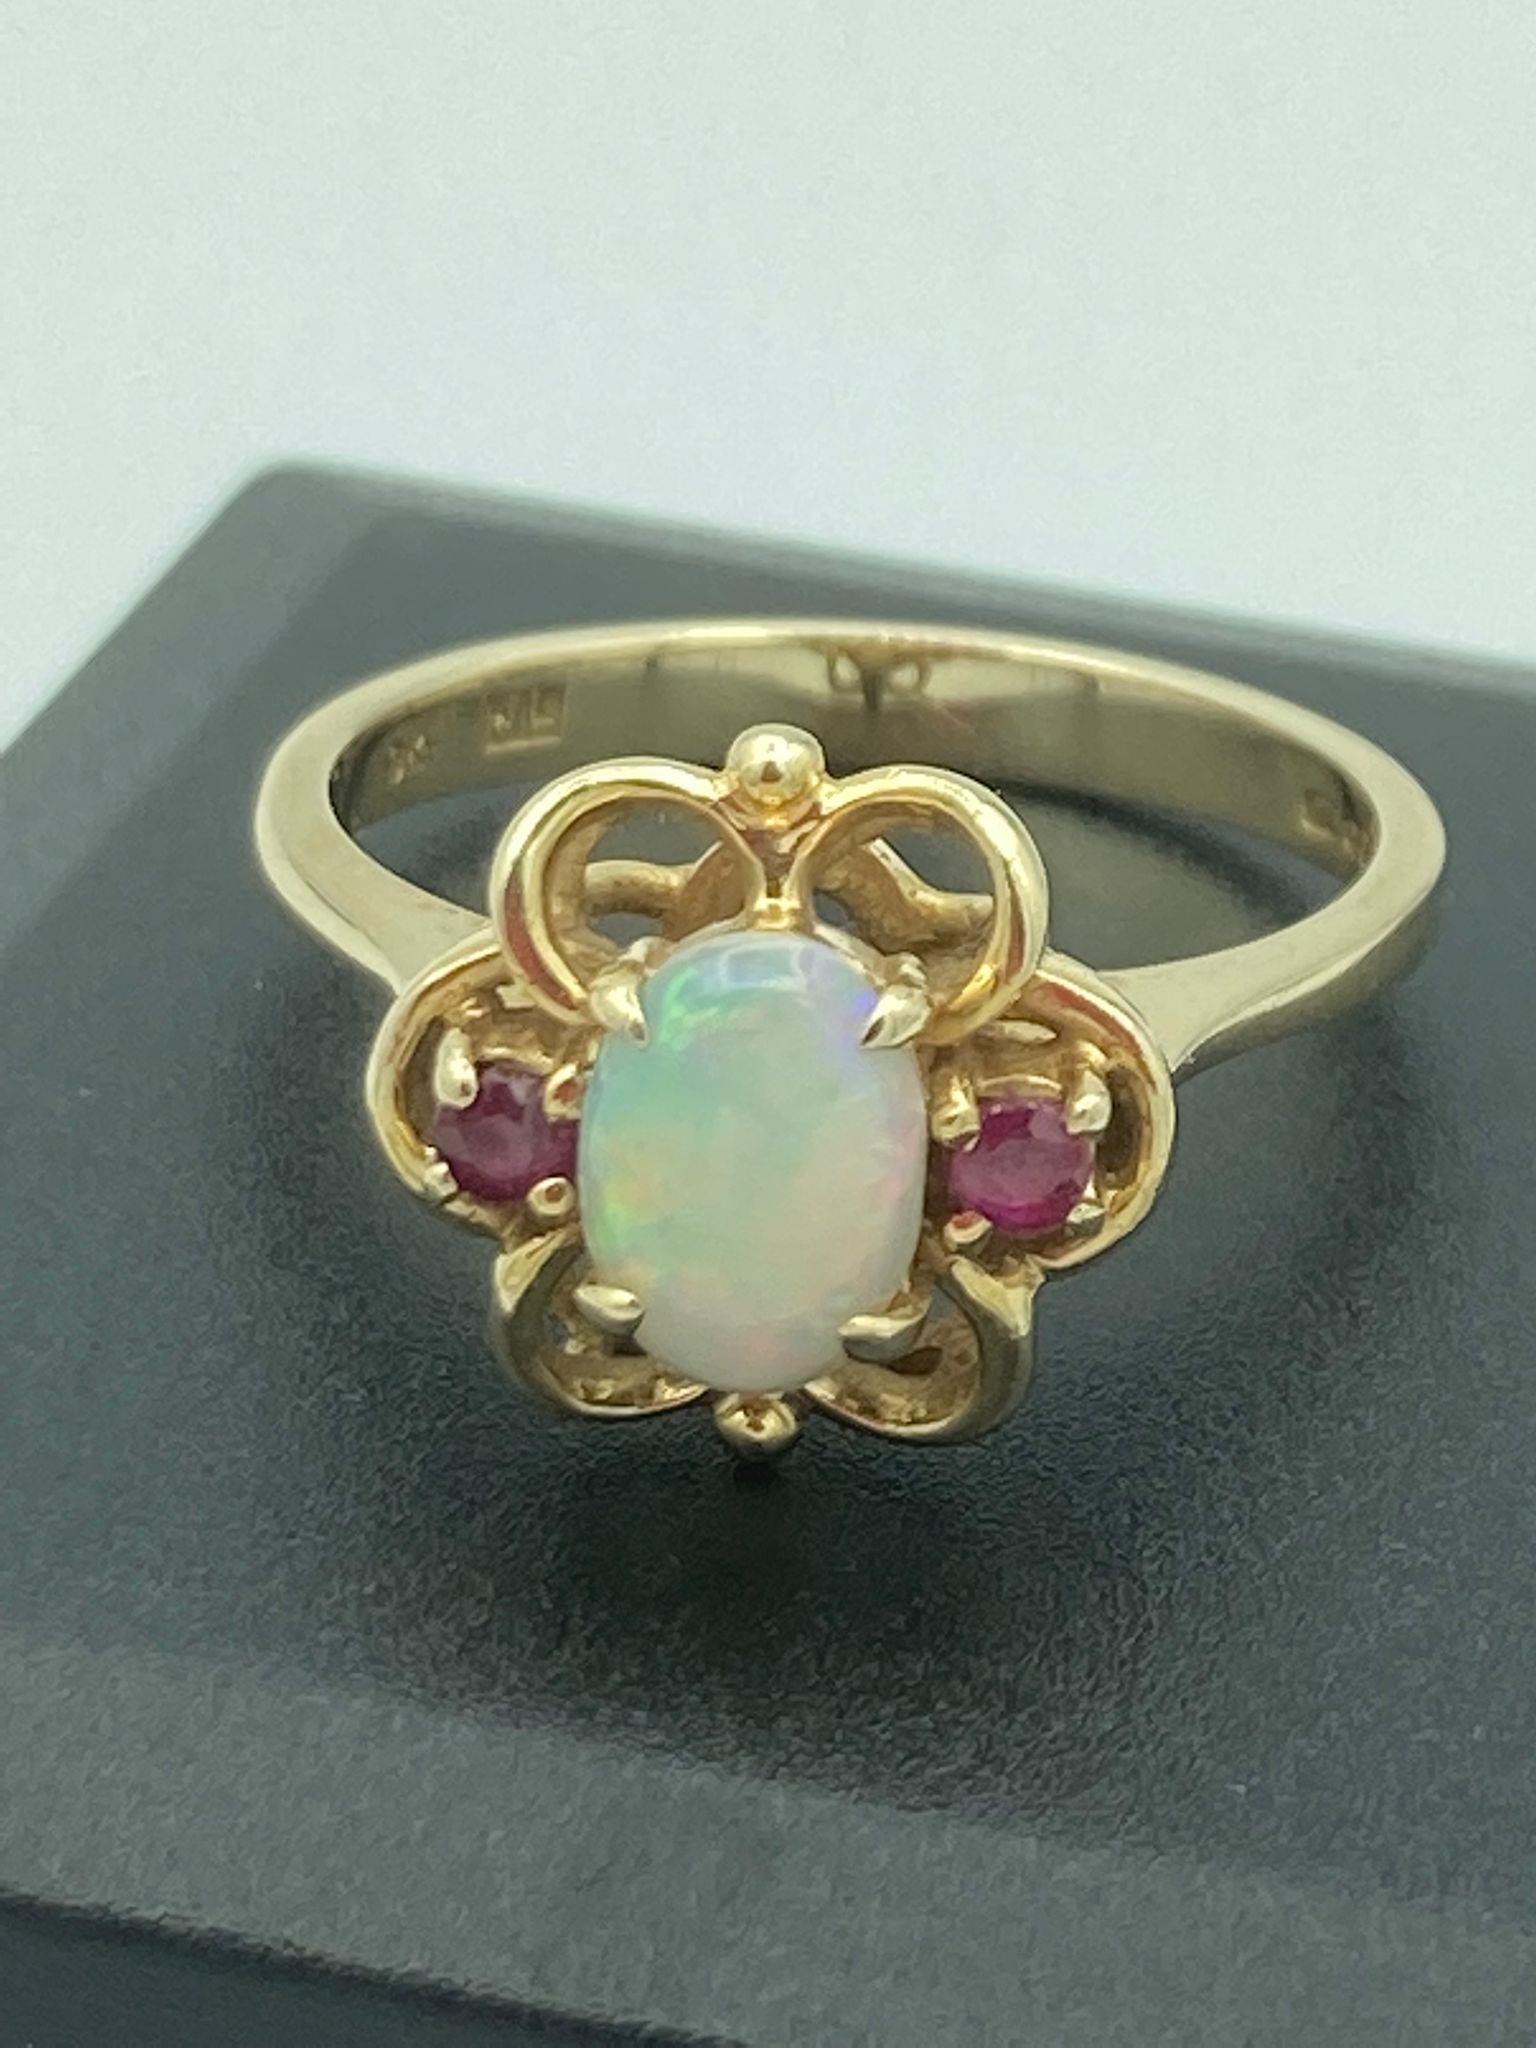 9 carat GOLD RING ring having OPAL and PINK TOPAZ set to top in GOLD openwork mount. 3.3 grams. Size